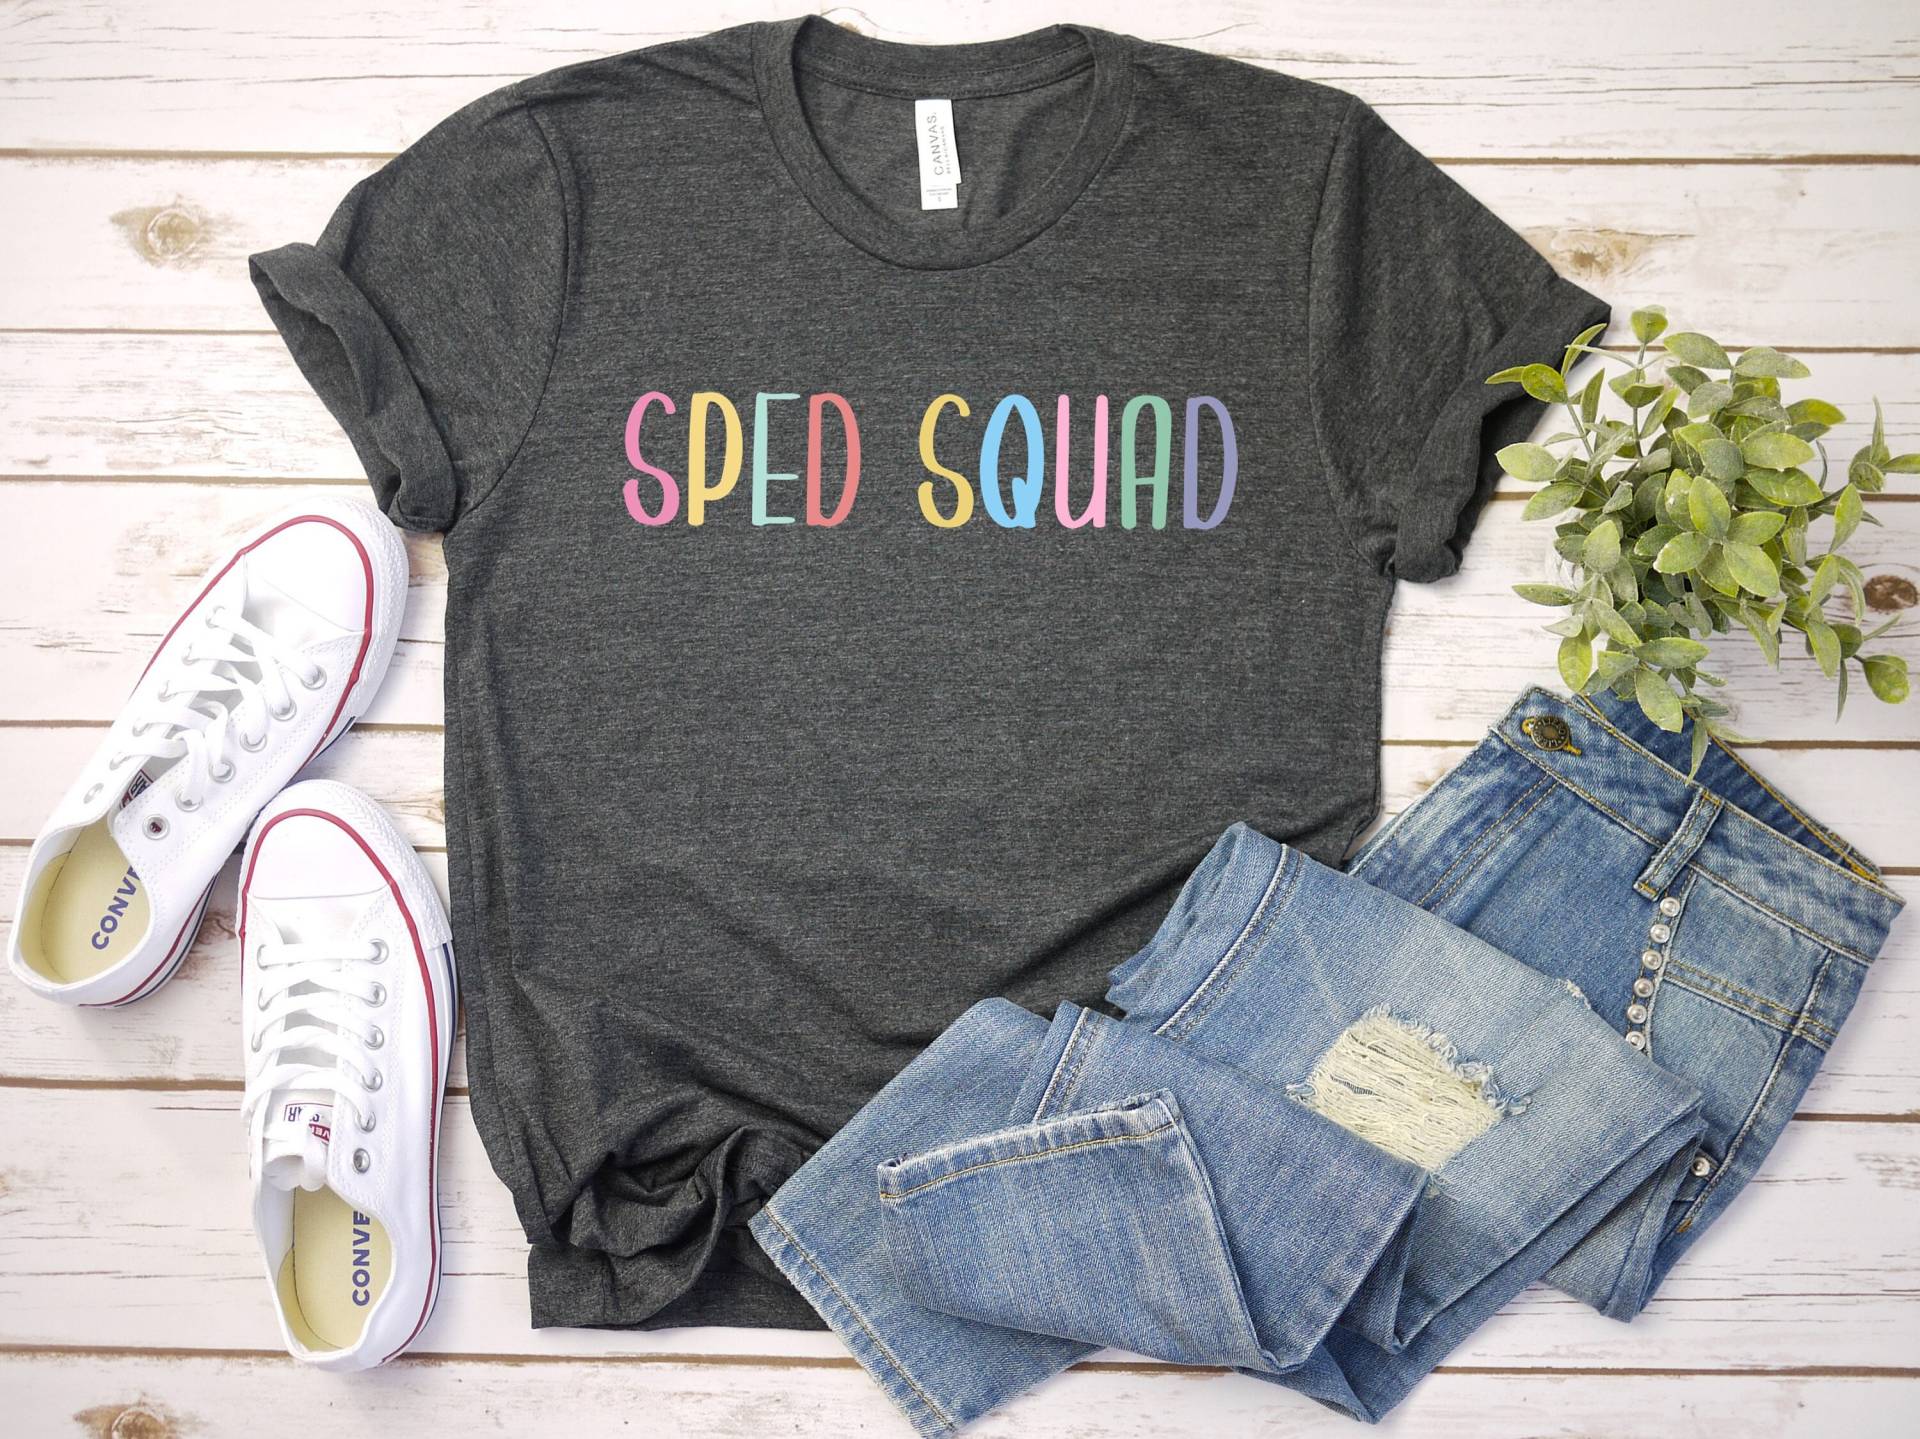 Sped Squad Shirt Teacher Shirt, Specials Teaching Team Crew Group, Special Ed Gift Education Student von SimplyTraded